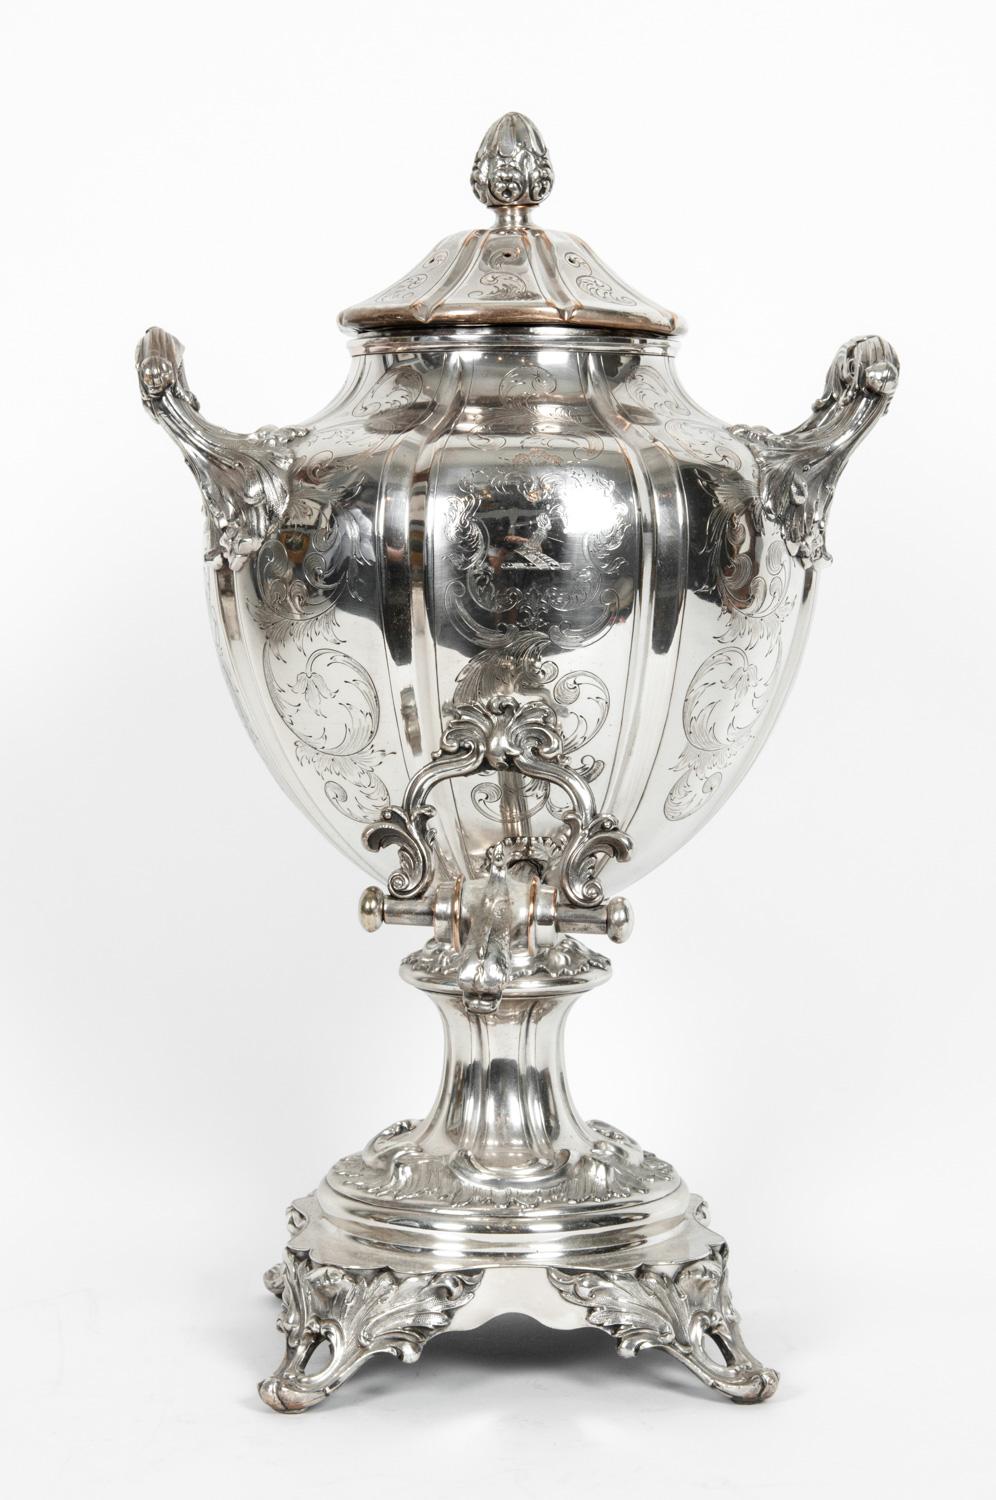 Antique English Regency Old Sheffield Samovar. It is silver plated on copper with beautiful embossed and engraved foliate and floral design details decoration. The piece is in excellent antique condition with minor wear consistent with age and use,